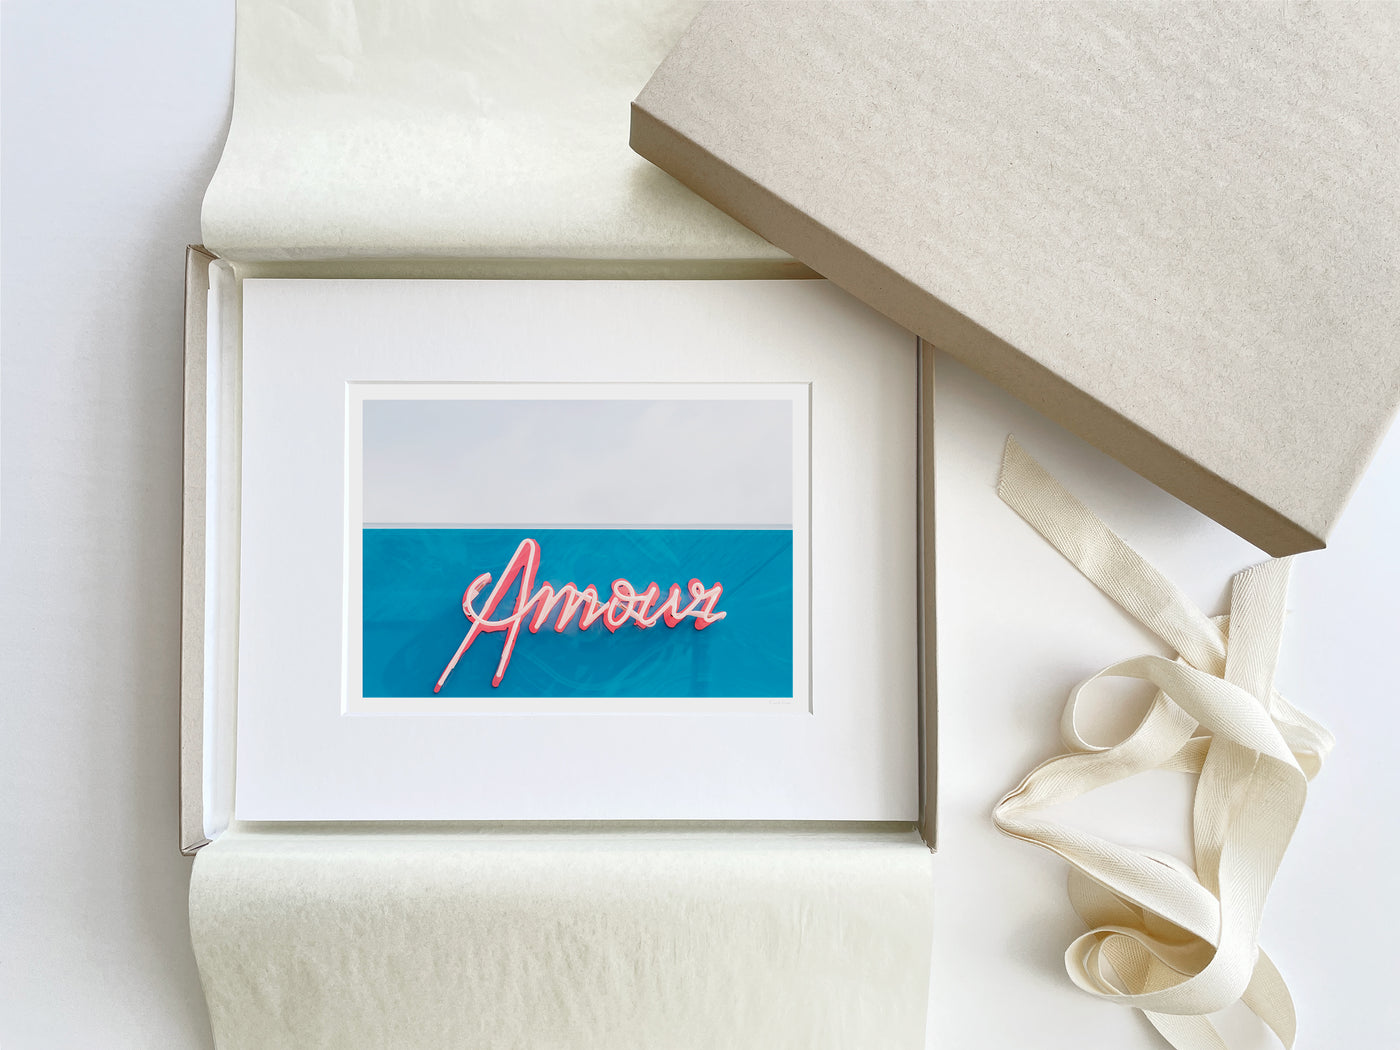 Amour - Art print by Cattie Coyle Photography in gift box